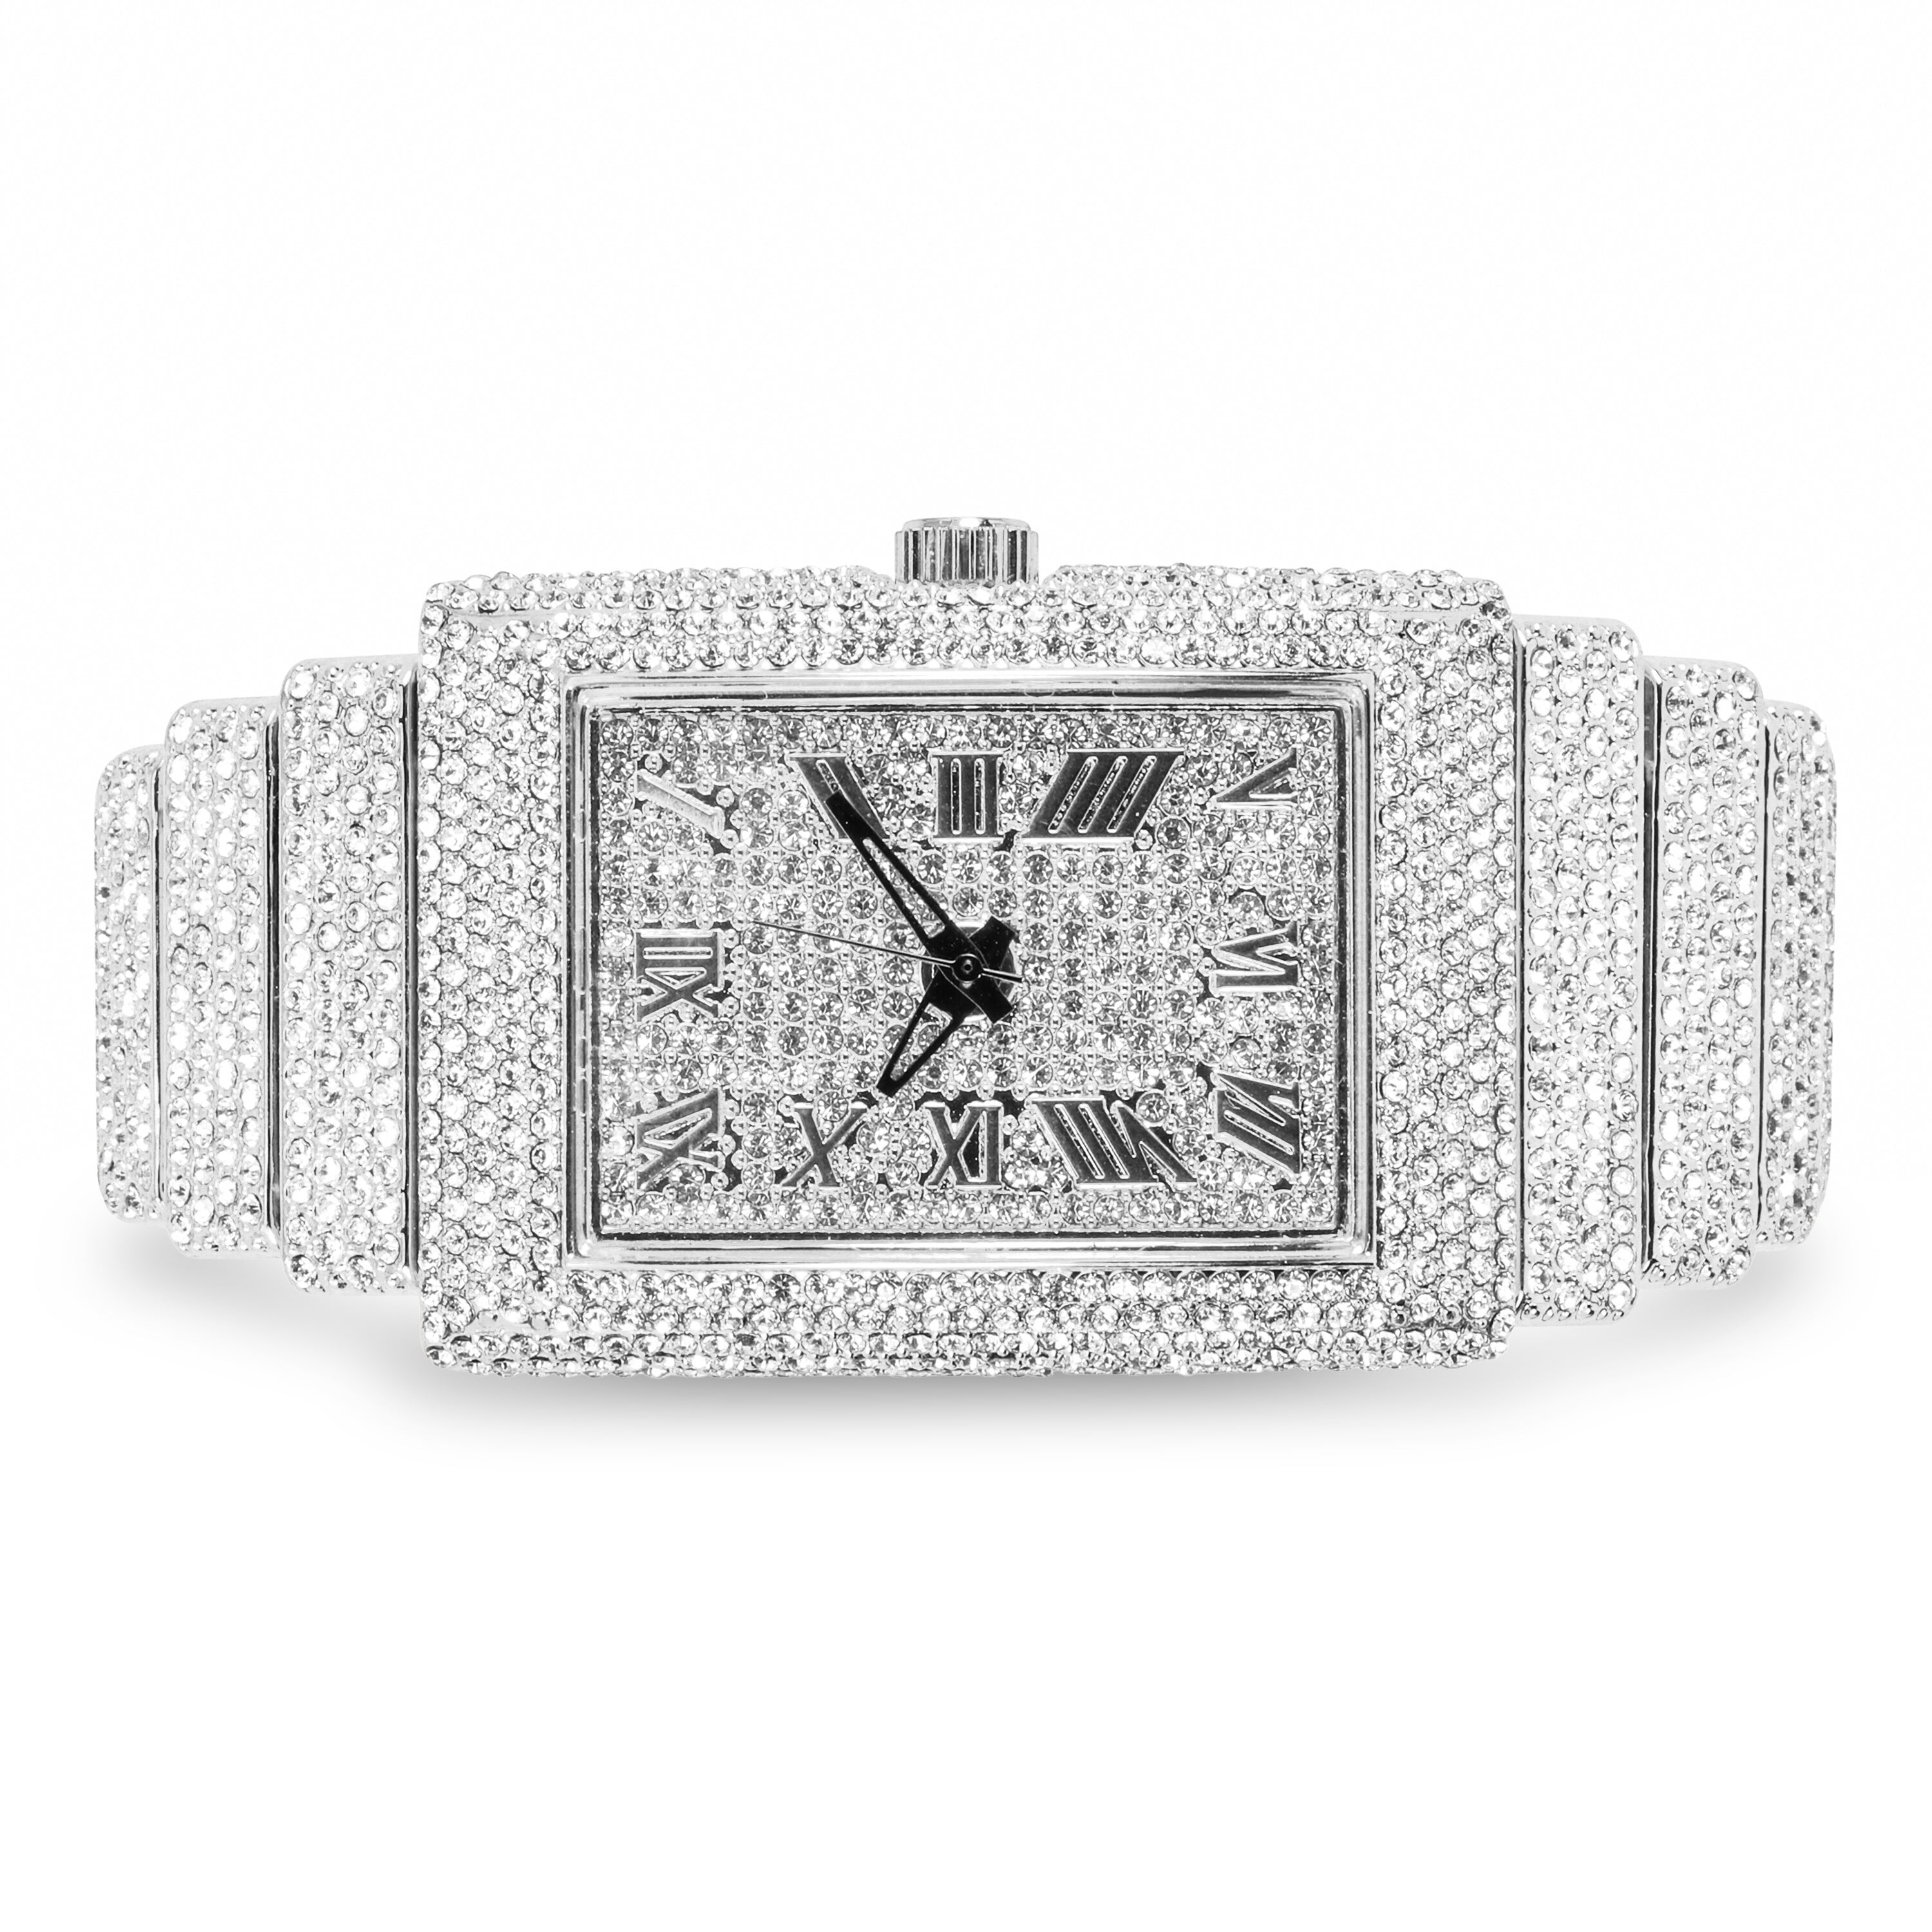 Women's Rectangle Chandelier Watch 33mm Silver - Fully Iced Band